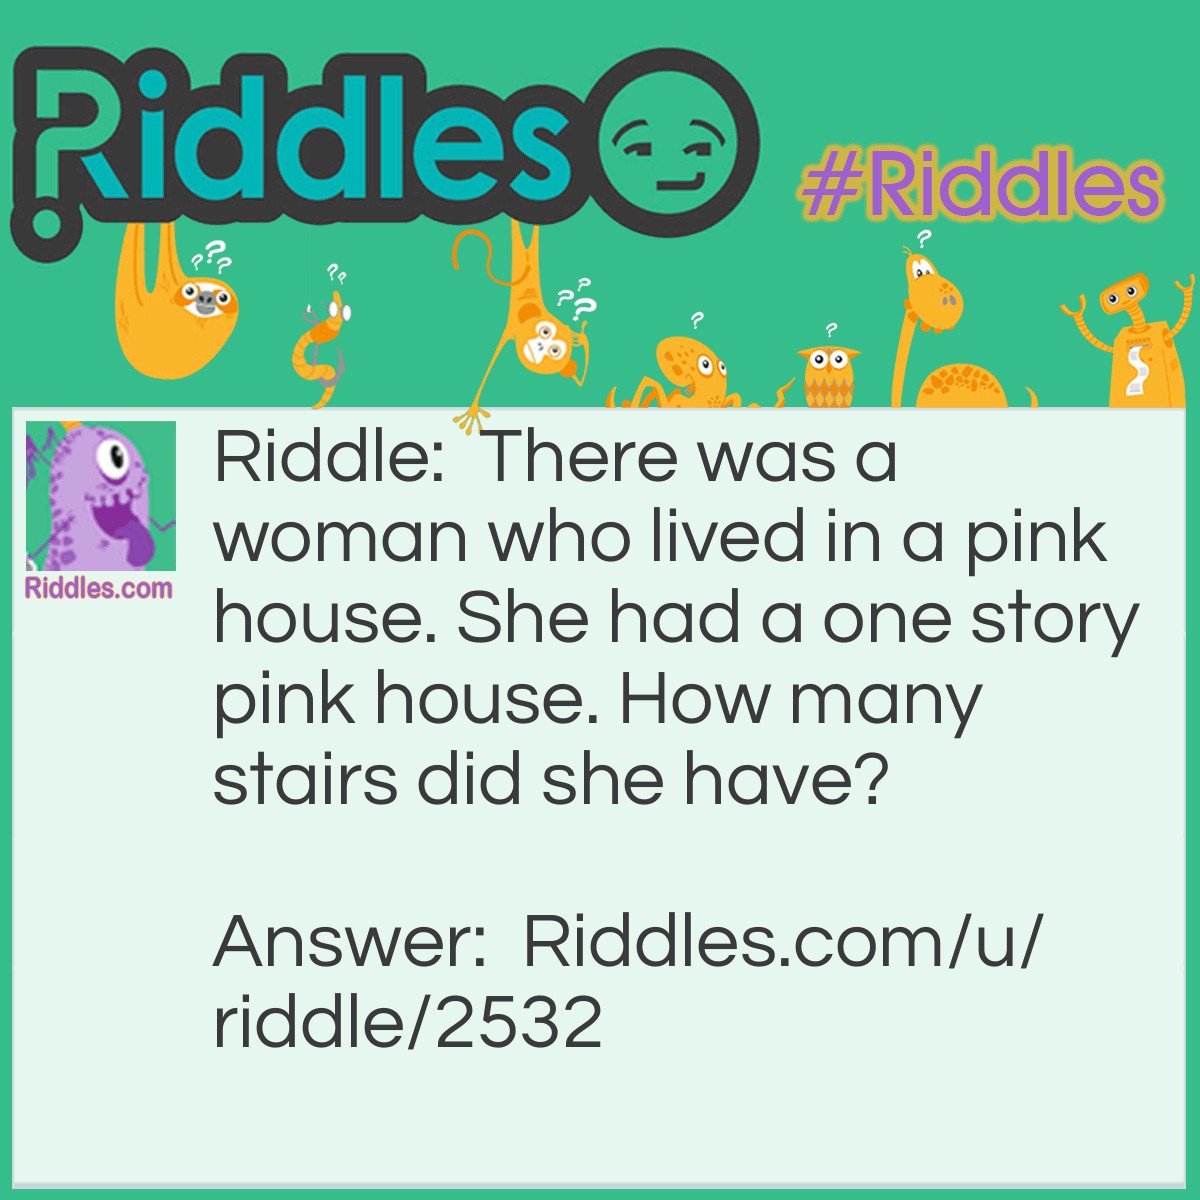 Riddle: There was a woman who lived in a pink house. She had a one story pink house. How many stairs did she have? Answer: None. There was only one floor.